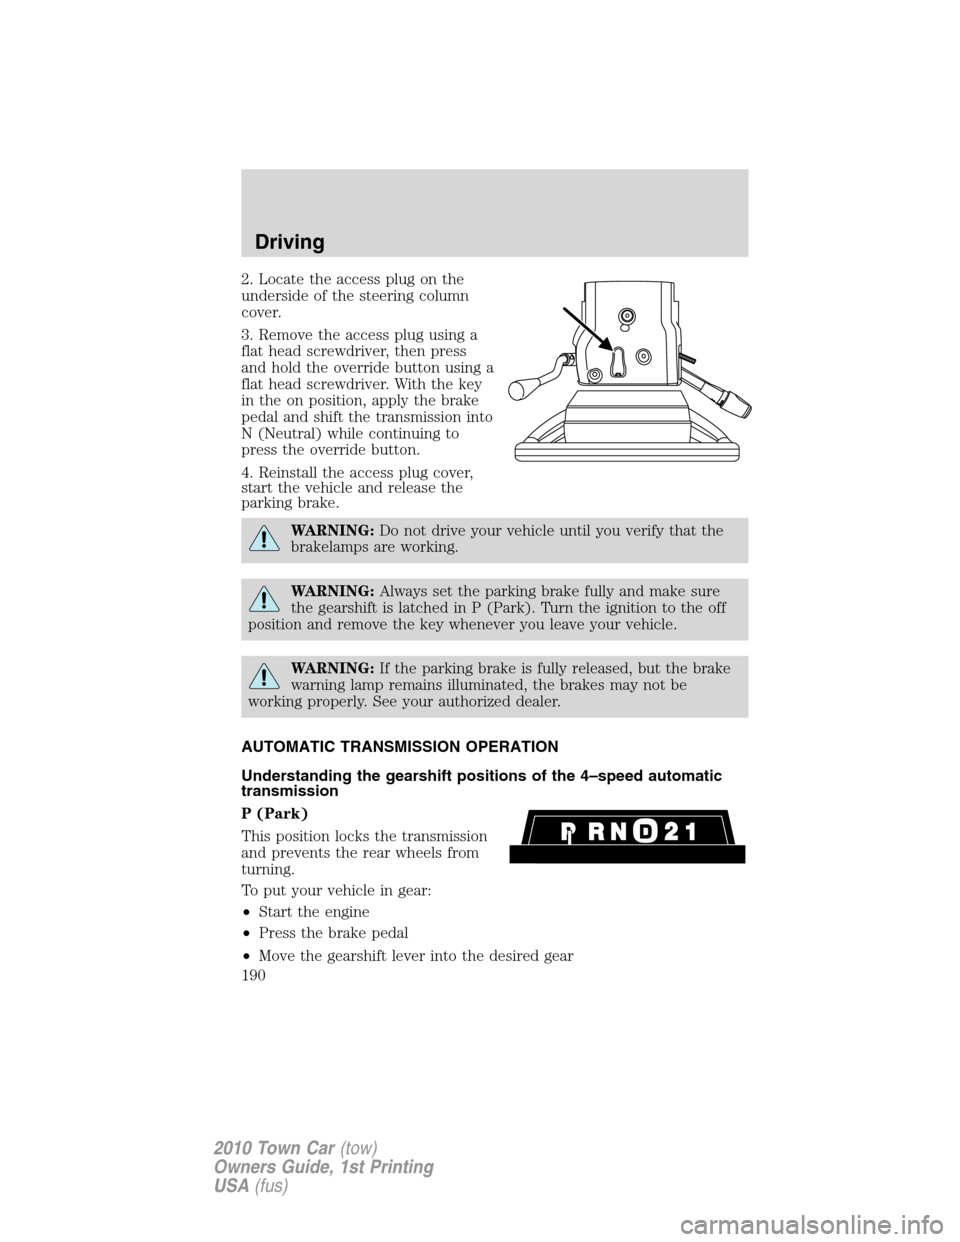 LINCOLN TOWN CAR 2010  Owners Manual 2. Locate the access plug on the
underside of the steering column
cover.
3. Remove the access plug using a
flat head screwdriver, then press
and hold the override button using a
flat head screwdriver.